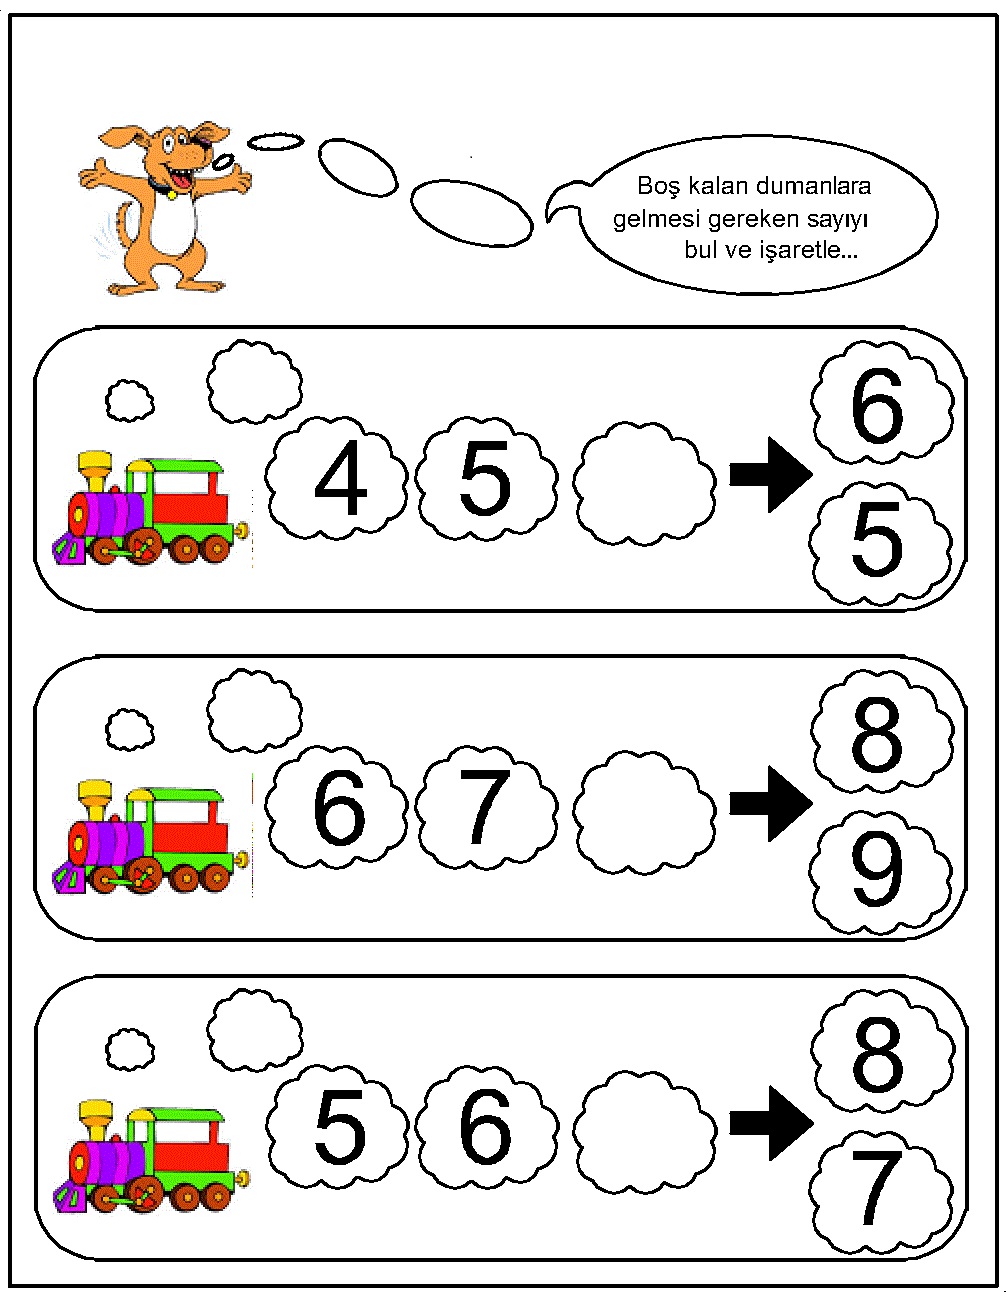 the-missing-number-worksheet-for-numbers-1-10-with-raindrops-and-clouds